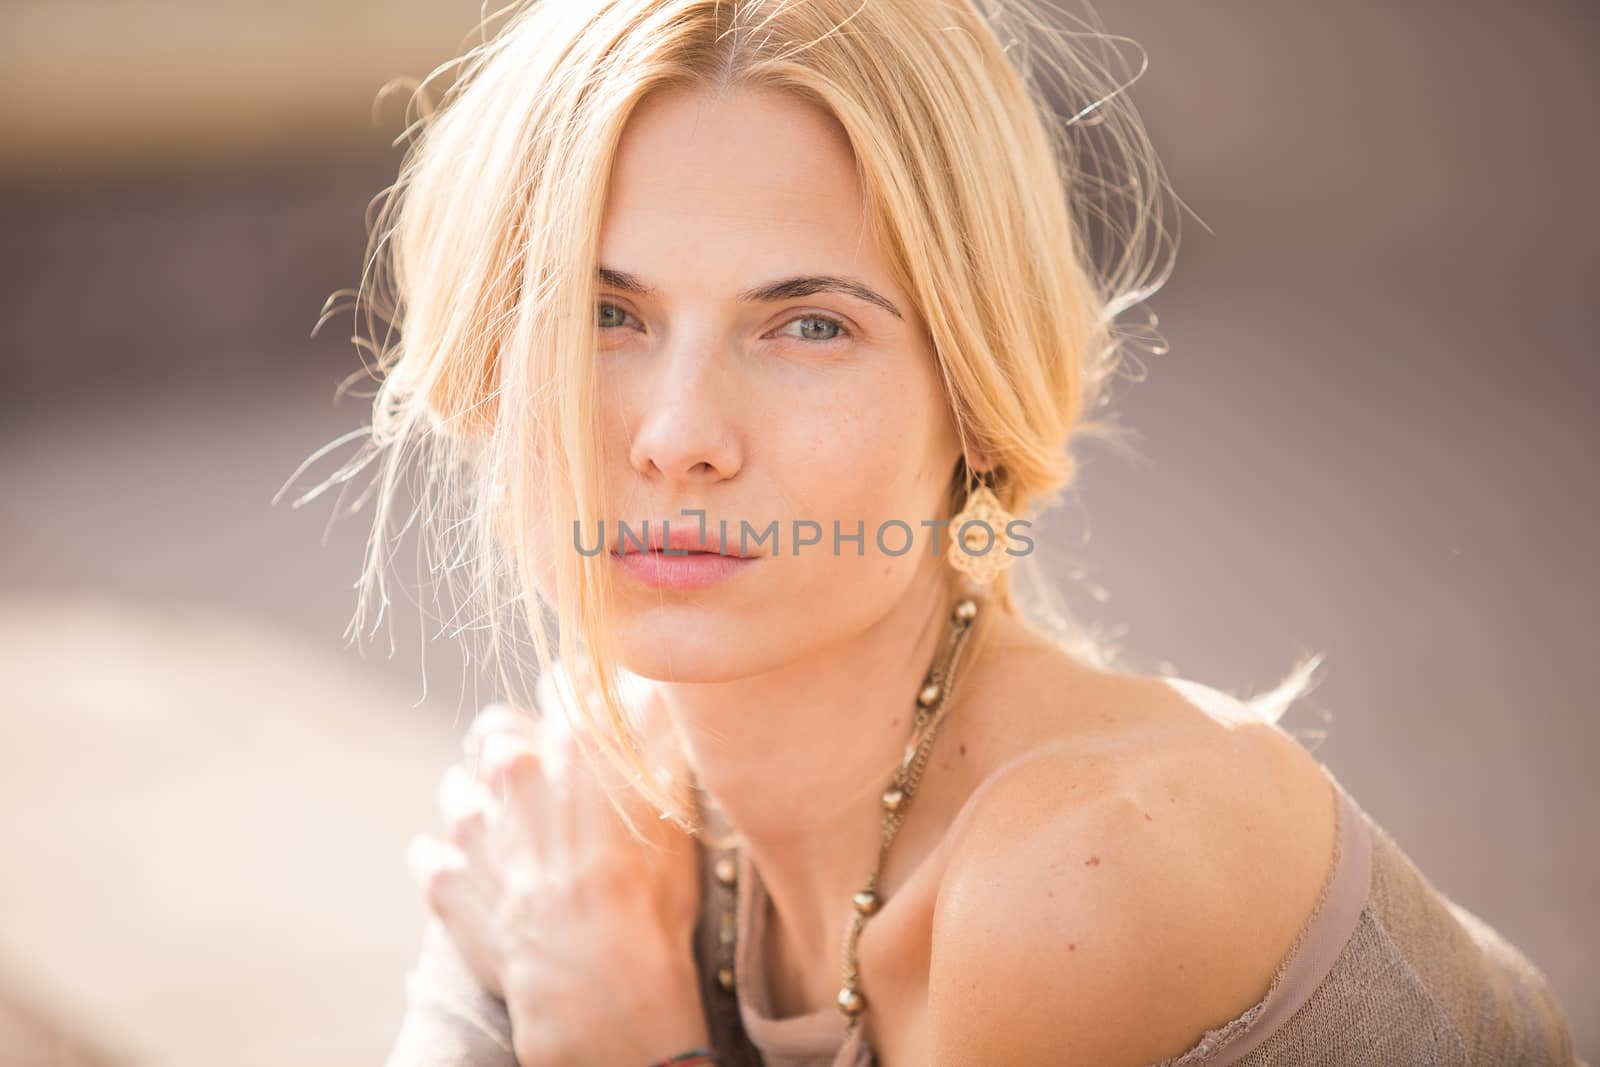 fashion portrait of a beautiful young woman on city background